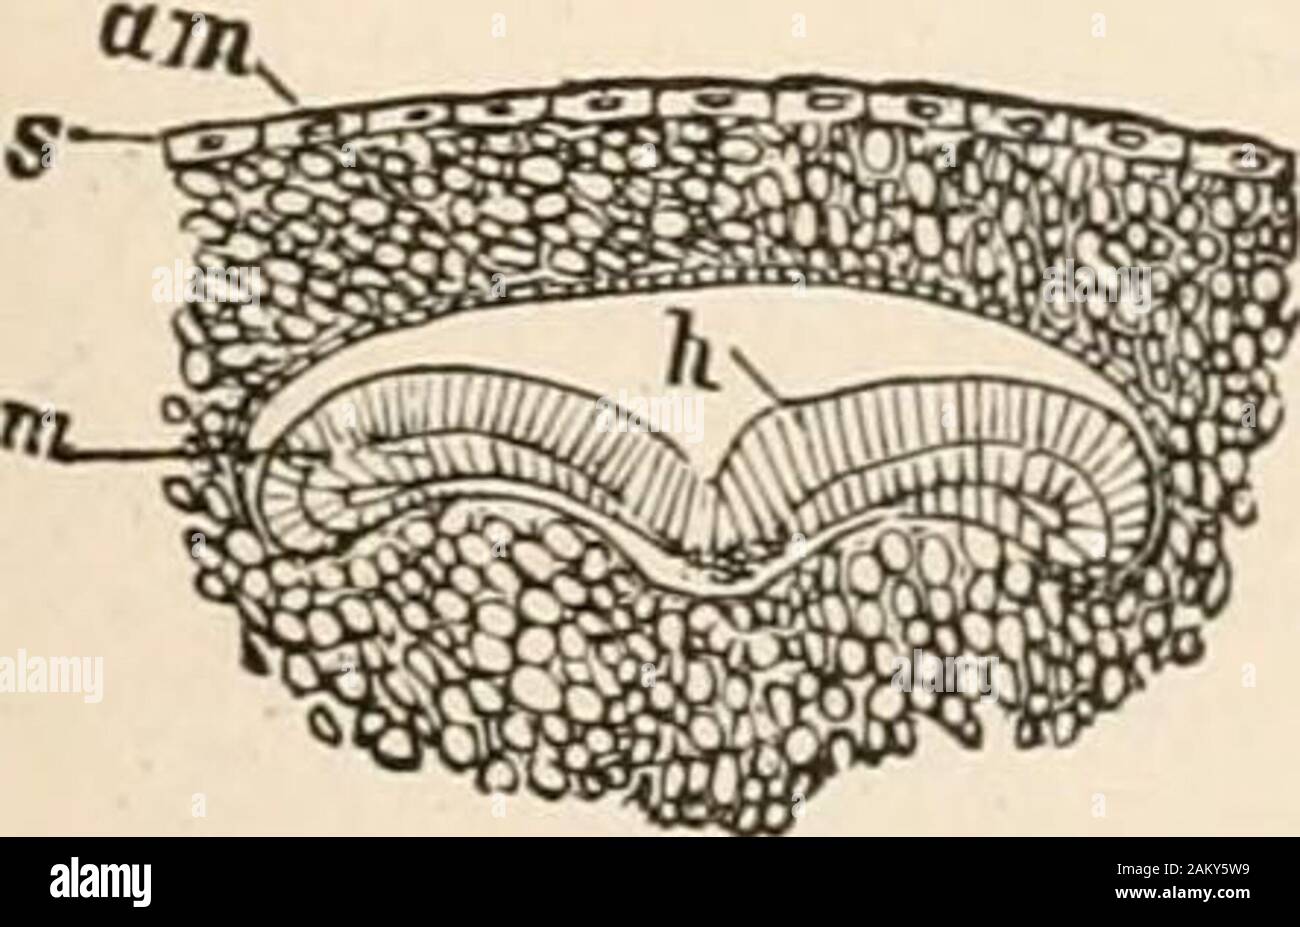 Entomology for beginners; for the use of young folks, fruitgrowers, farmers, and gardeners; . m n o p q r s FIG. 30.—Eggs of different insects, a, Tortrix; 6, Liparis; c, a noctuid, Trachea;d, usual shape of those of bark-borer, etc.; e, Melolontha; /, Chironomus; g,Lyda; h, Musca; i, honey-bee; fc, Rhodites rosae; /, Chrysopa; m, Drosophila;n, Pentatoma; o, Nepa; p, Pieris crataegi; q, bed-bug; r, louse, fastened to ahair; s, Hypoderma actseon, bot-fly.—From Judeich and Nitsche. putrid meat, and moths and butterflies lay their eggs onthe leaves or stems of the food-plant, where the caterpilla Stock Photo